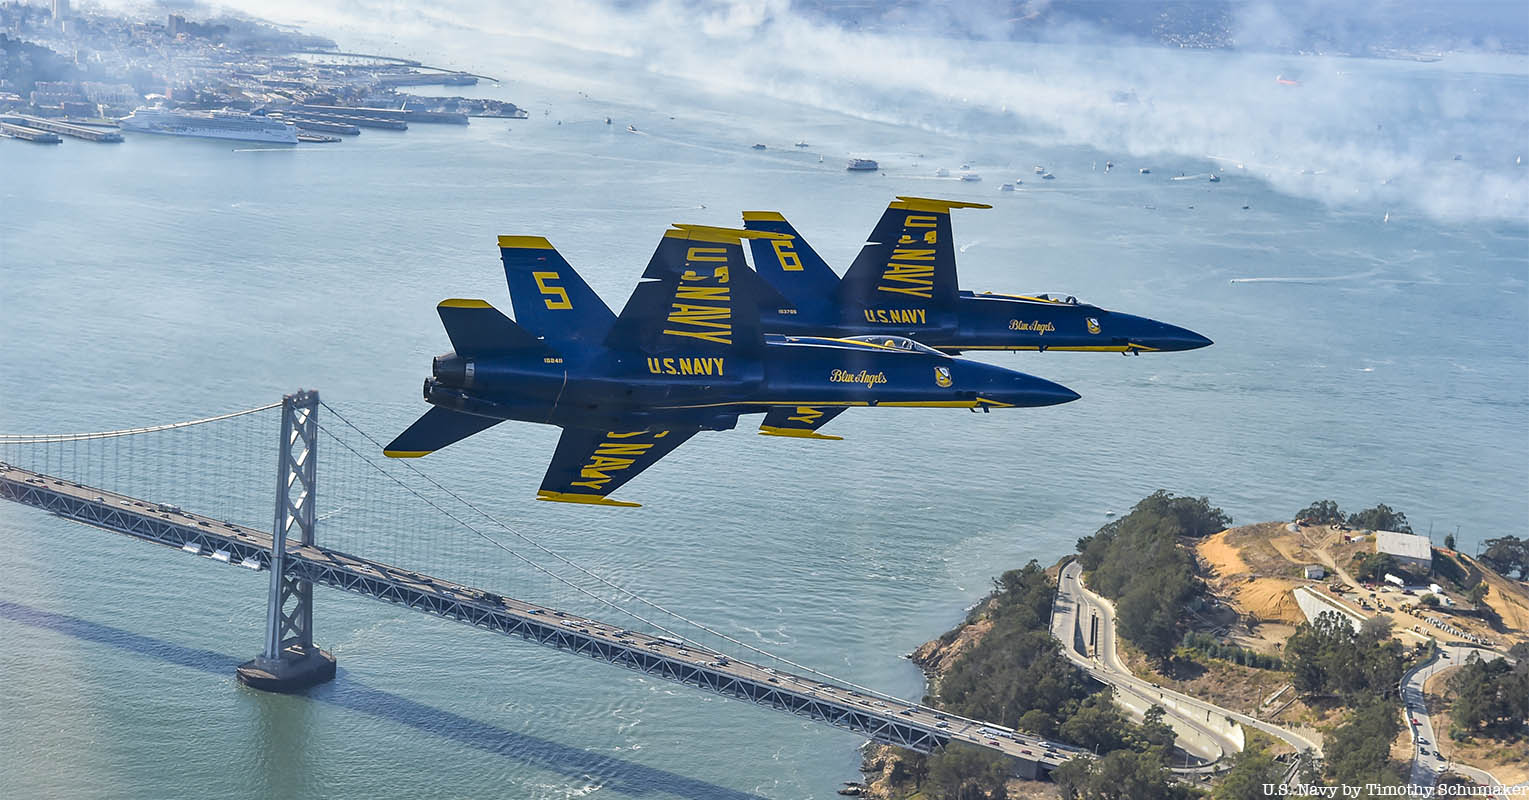 U.S. Navy Blue Angels in formation